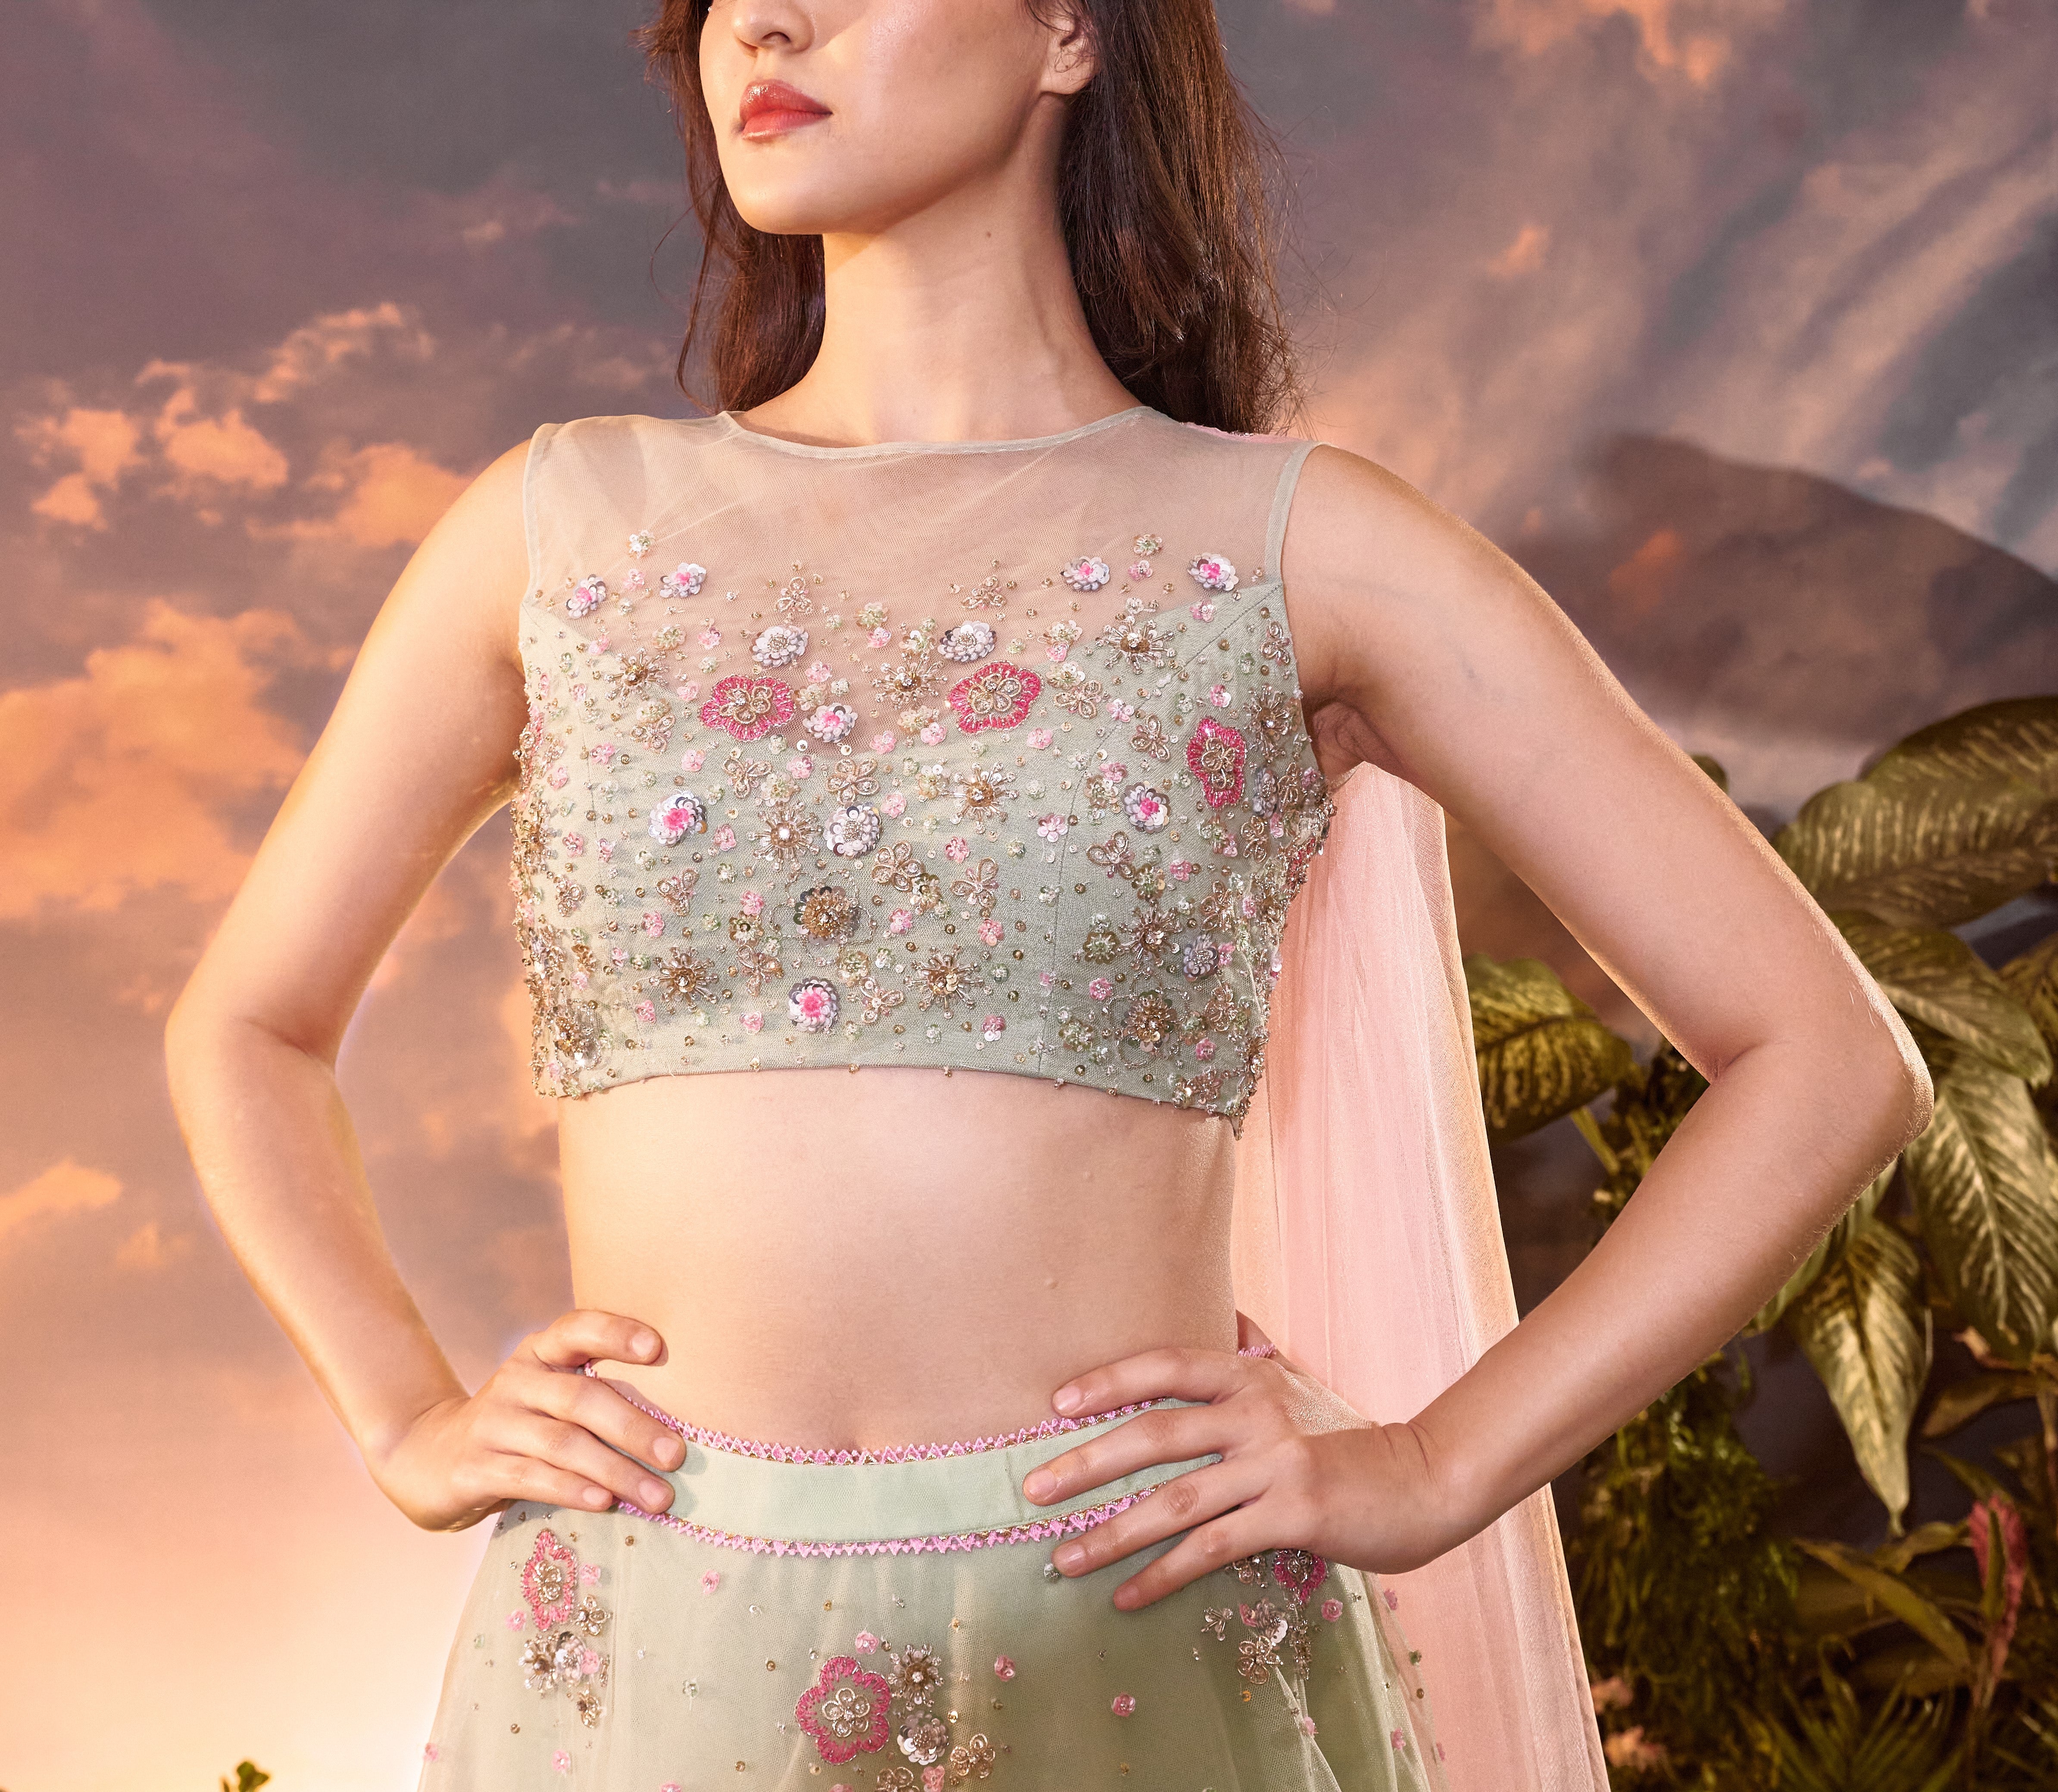 Mint green net embroidered lehenga set with back brooched pink dupatta –  Seharre by Sahithee Reddy